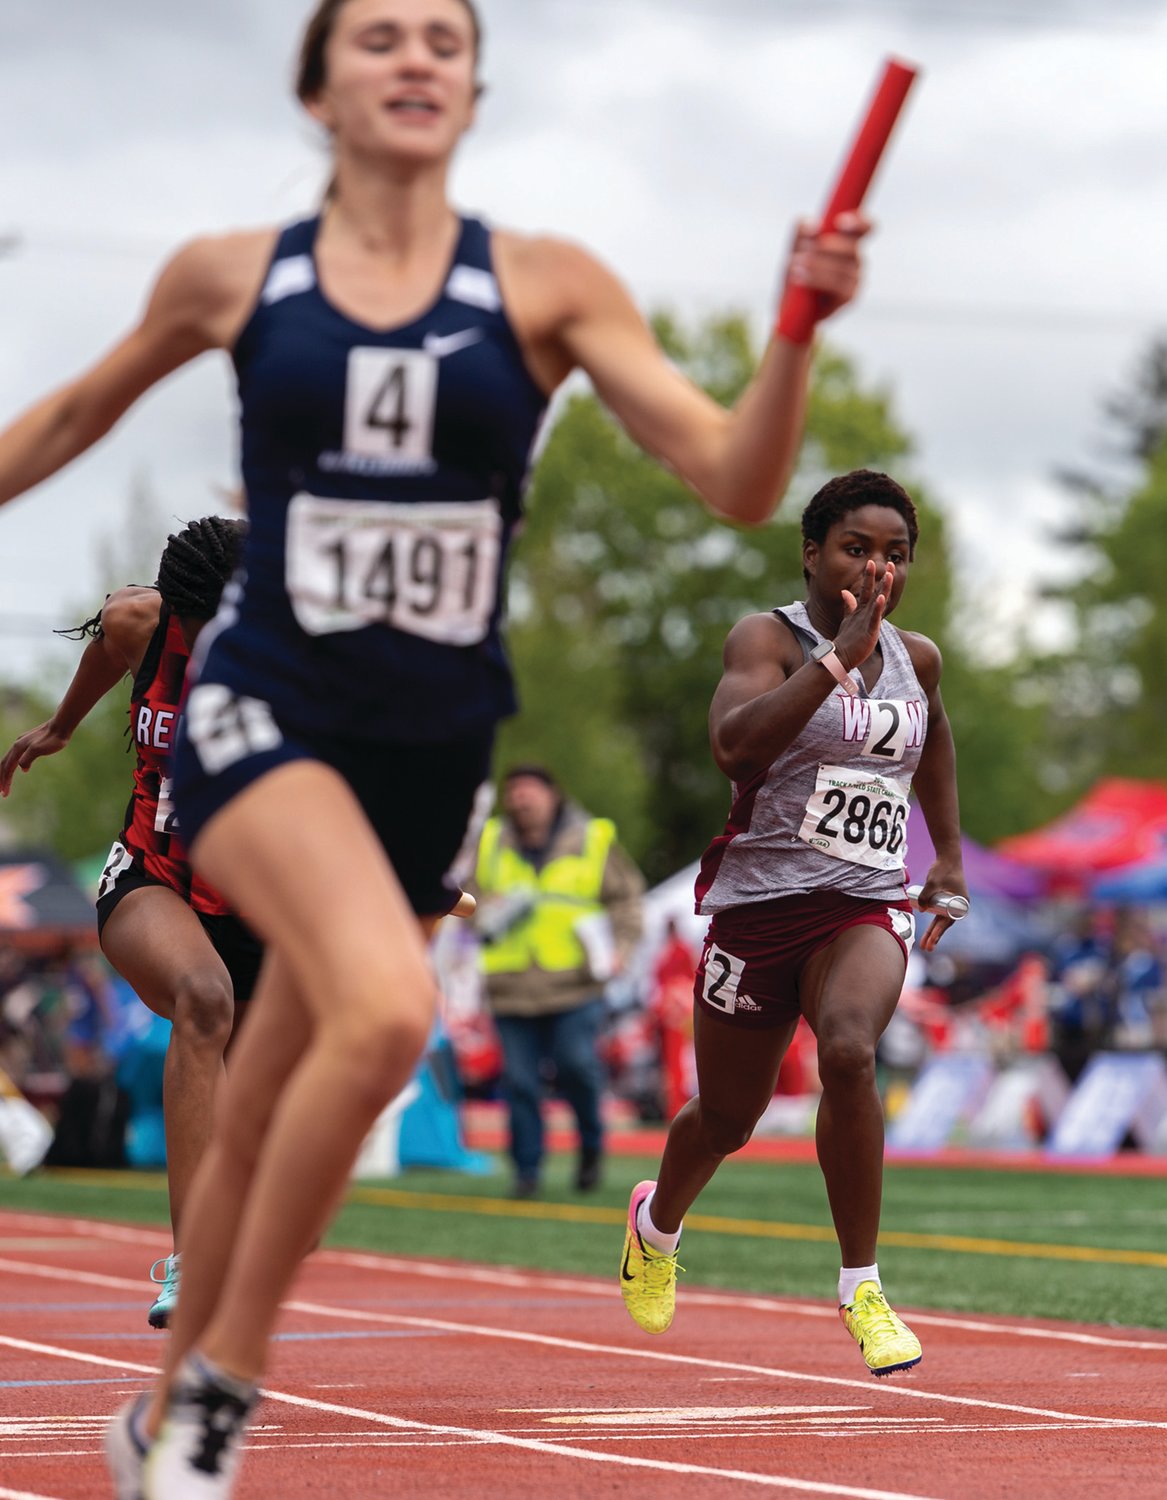 W.F. West's Hodaya Starr races to the fnish as the anchor leg of the 2A Girls 4x100 Prelim at the 4A/3A/2A State Track and Field Championships on Friday, May 27, 2022, at Mount Tahoma High School in Tacoma. (Joshua Hart/For The Chronicle)